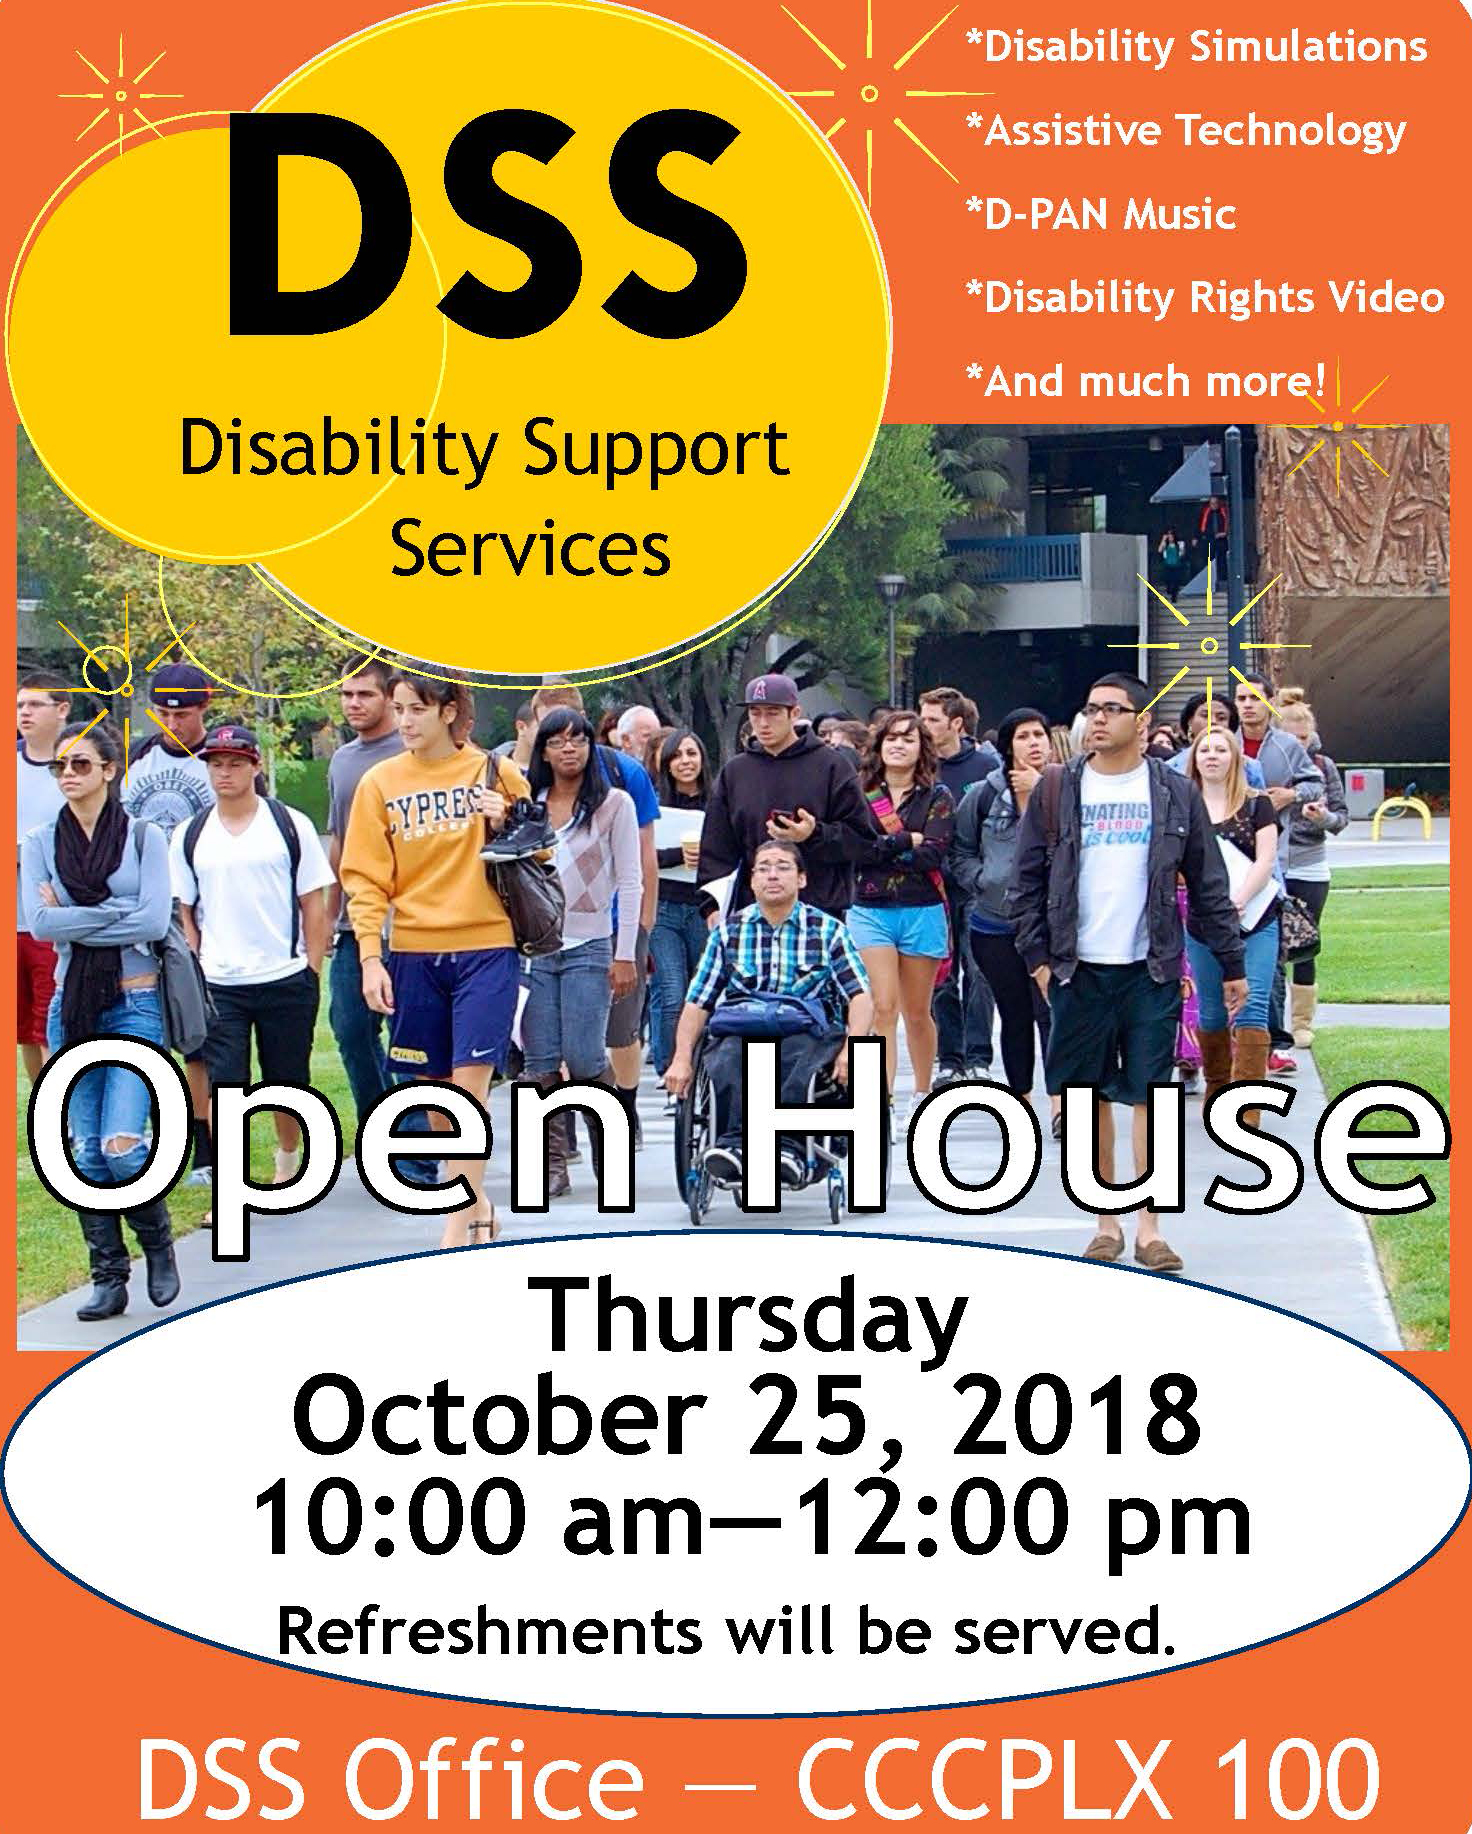 DSS Disability Support Services Open House flyer.